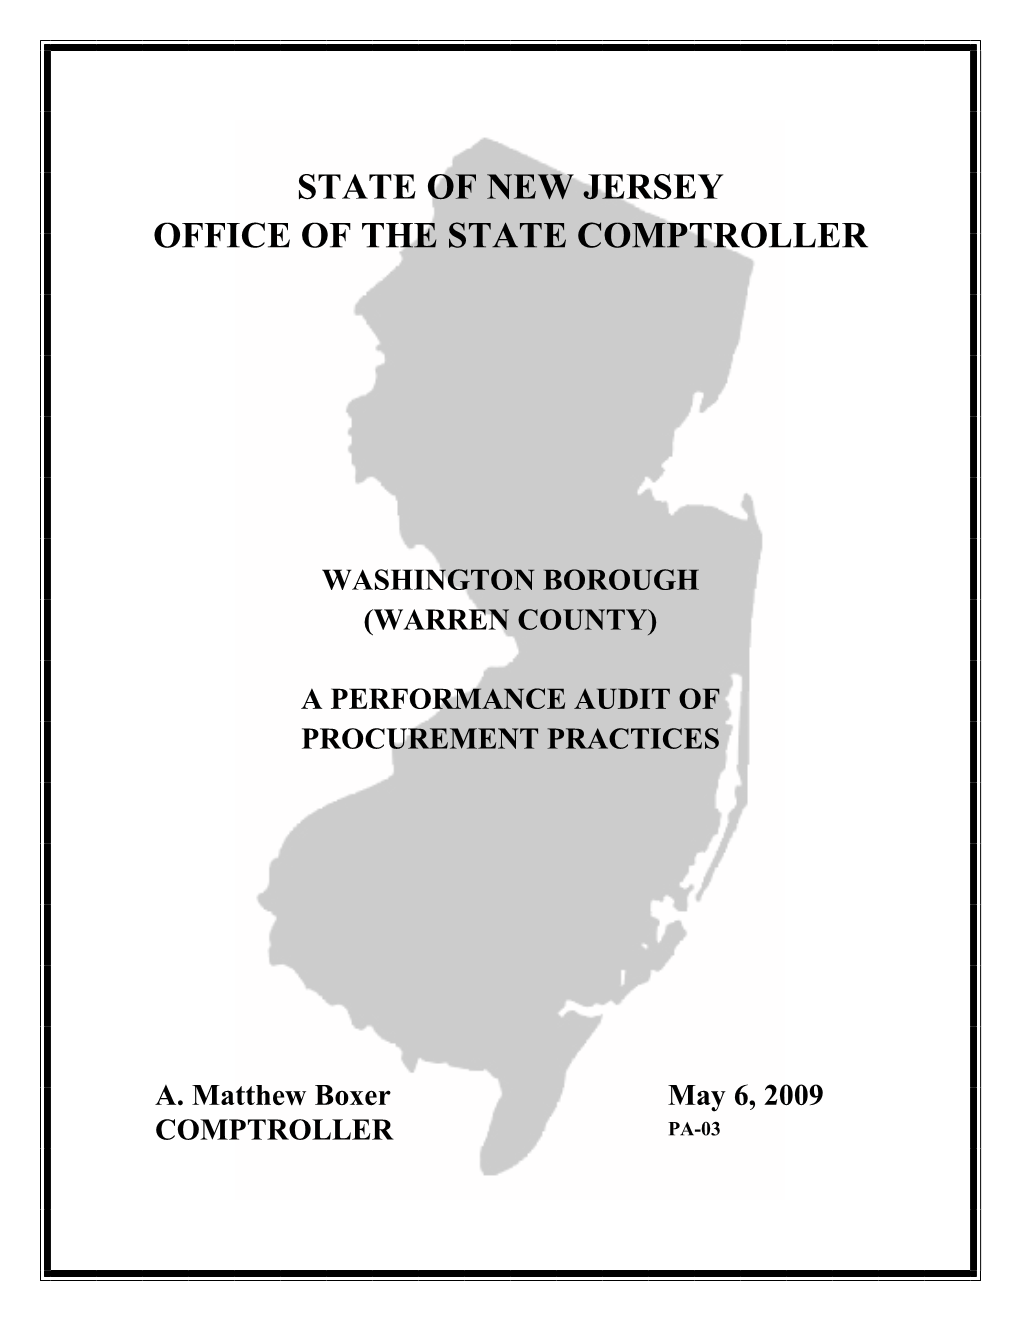 State of New Jersey Office of the State Comptroller